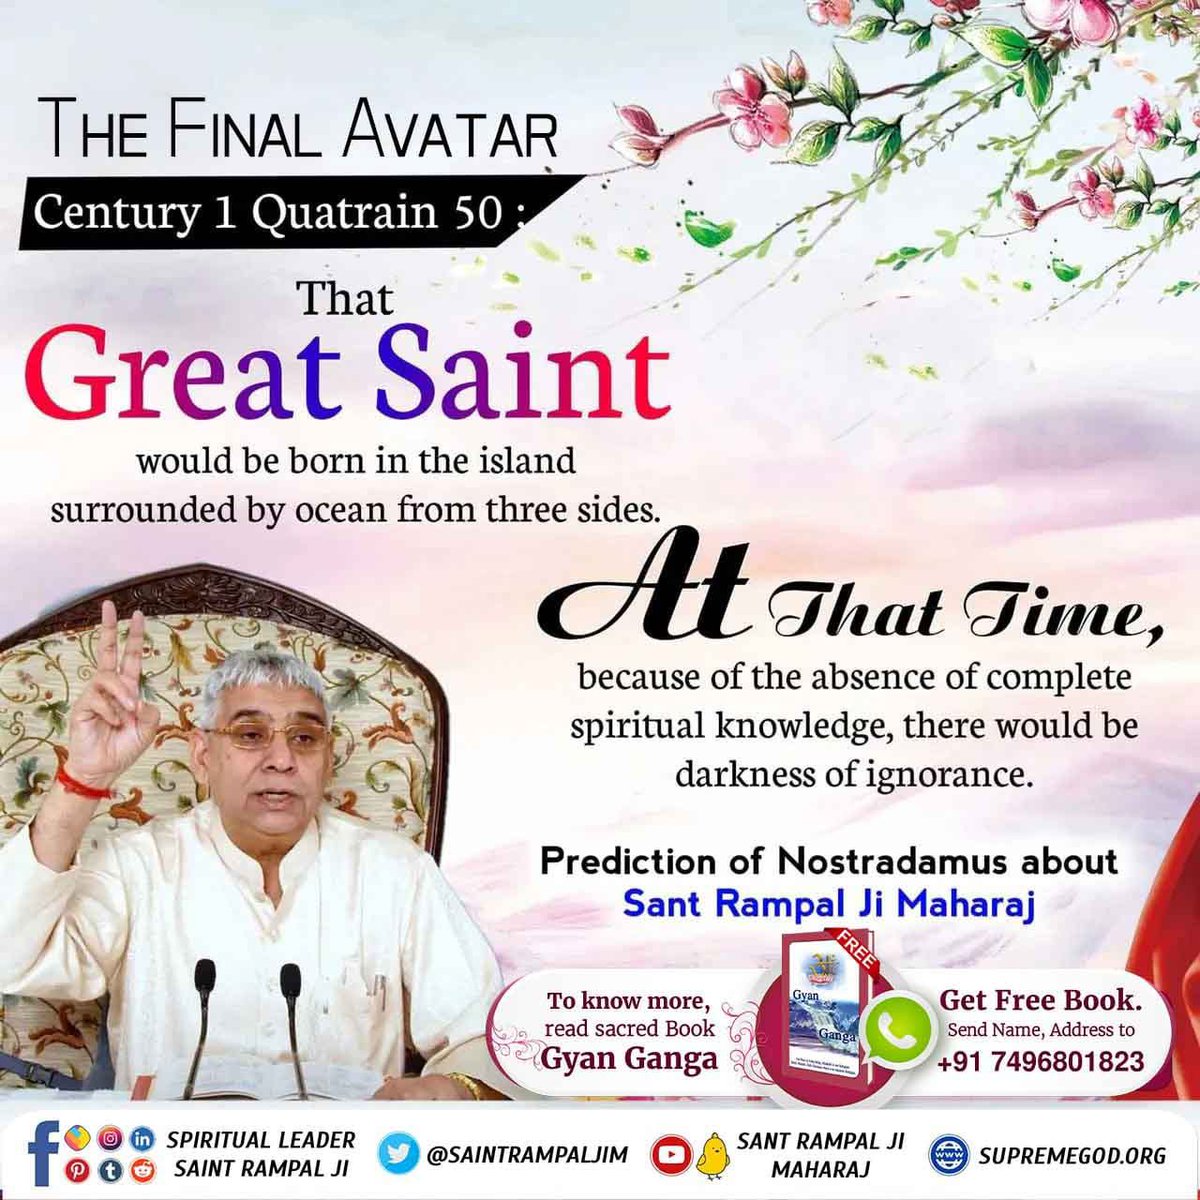 #GodMornimgFriday #आदि_सनातनधर्म_होगाप्रतिष्ठित THE FINAL AVATAR Century 1 Quatrain 50: That Great Saint would be born in the island surrounded by ocean from three sides........❓ To know more, read sacred Book “Gyan Ganga” 📖